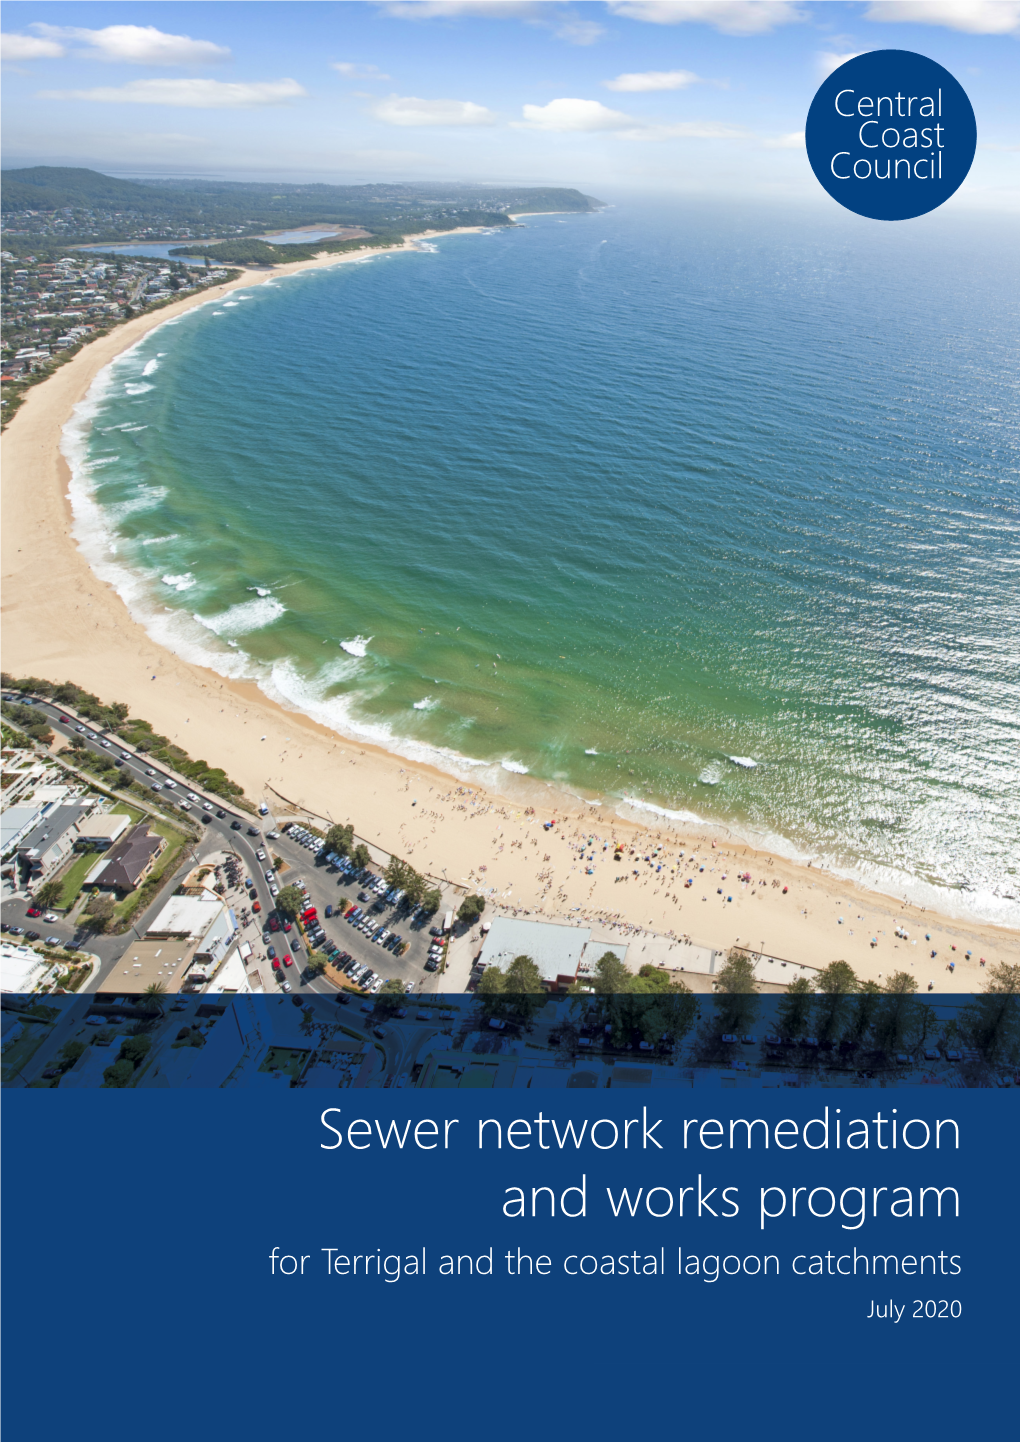 Sewer Network Remediation and Works Program for Terrigal and the Coastal Lagoon Catchments July 2020